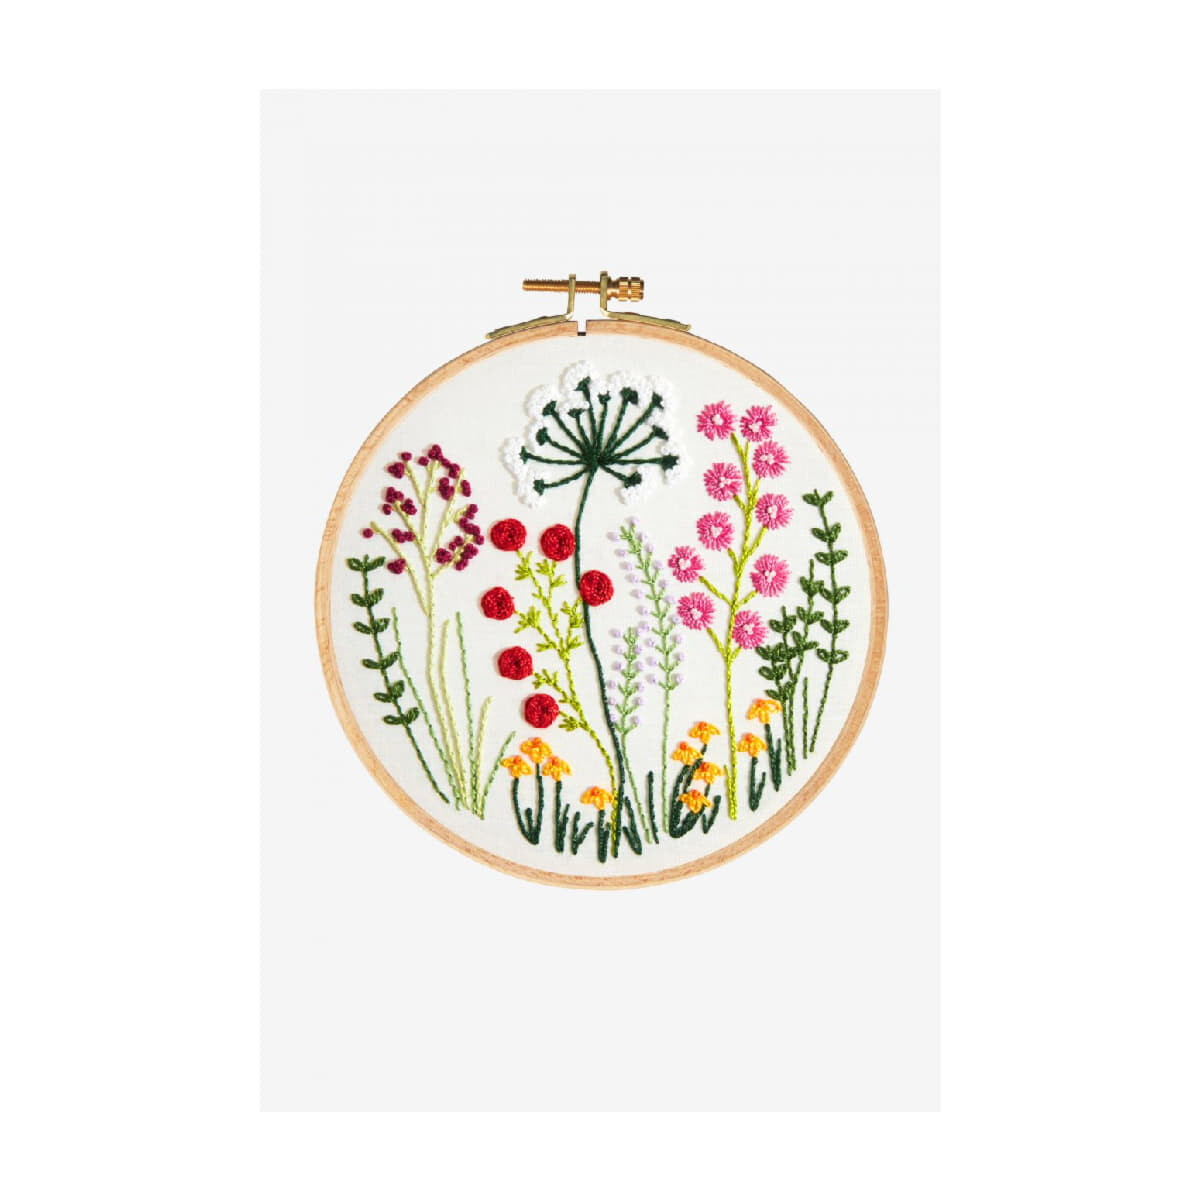 DMC stamped Stitch Kit Country Classic with hoop, DIY